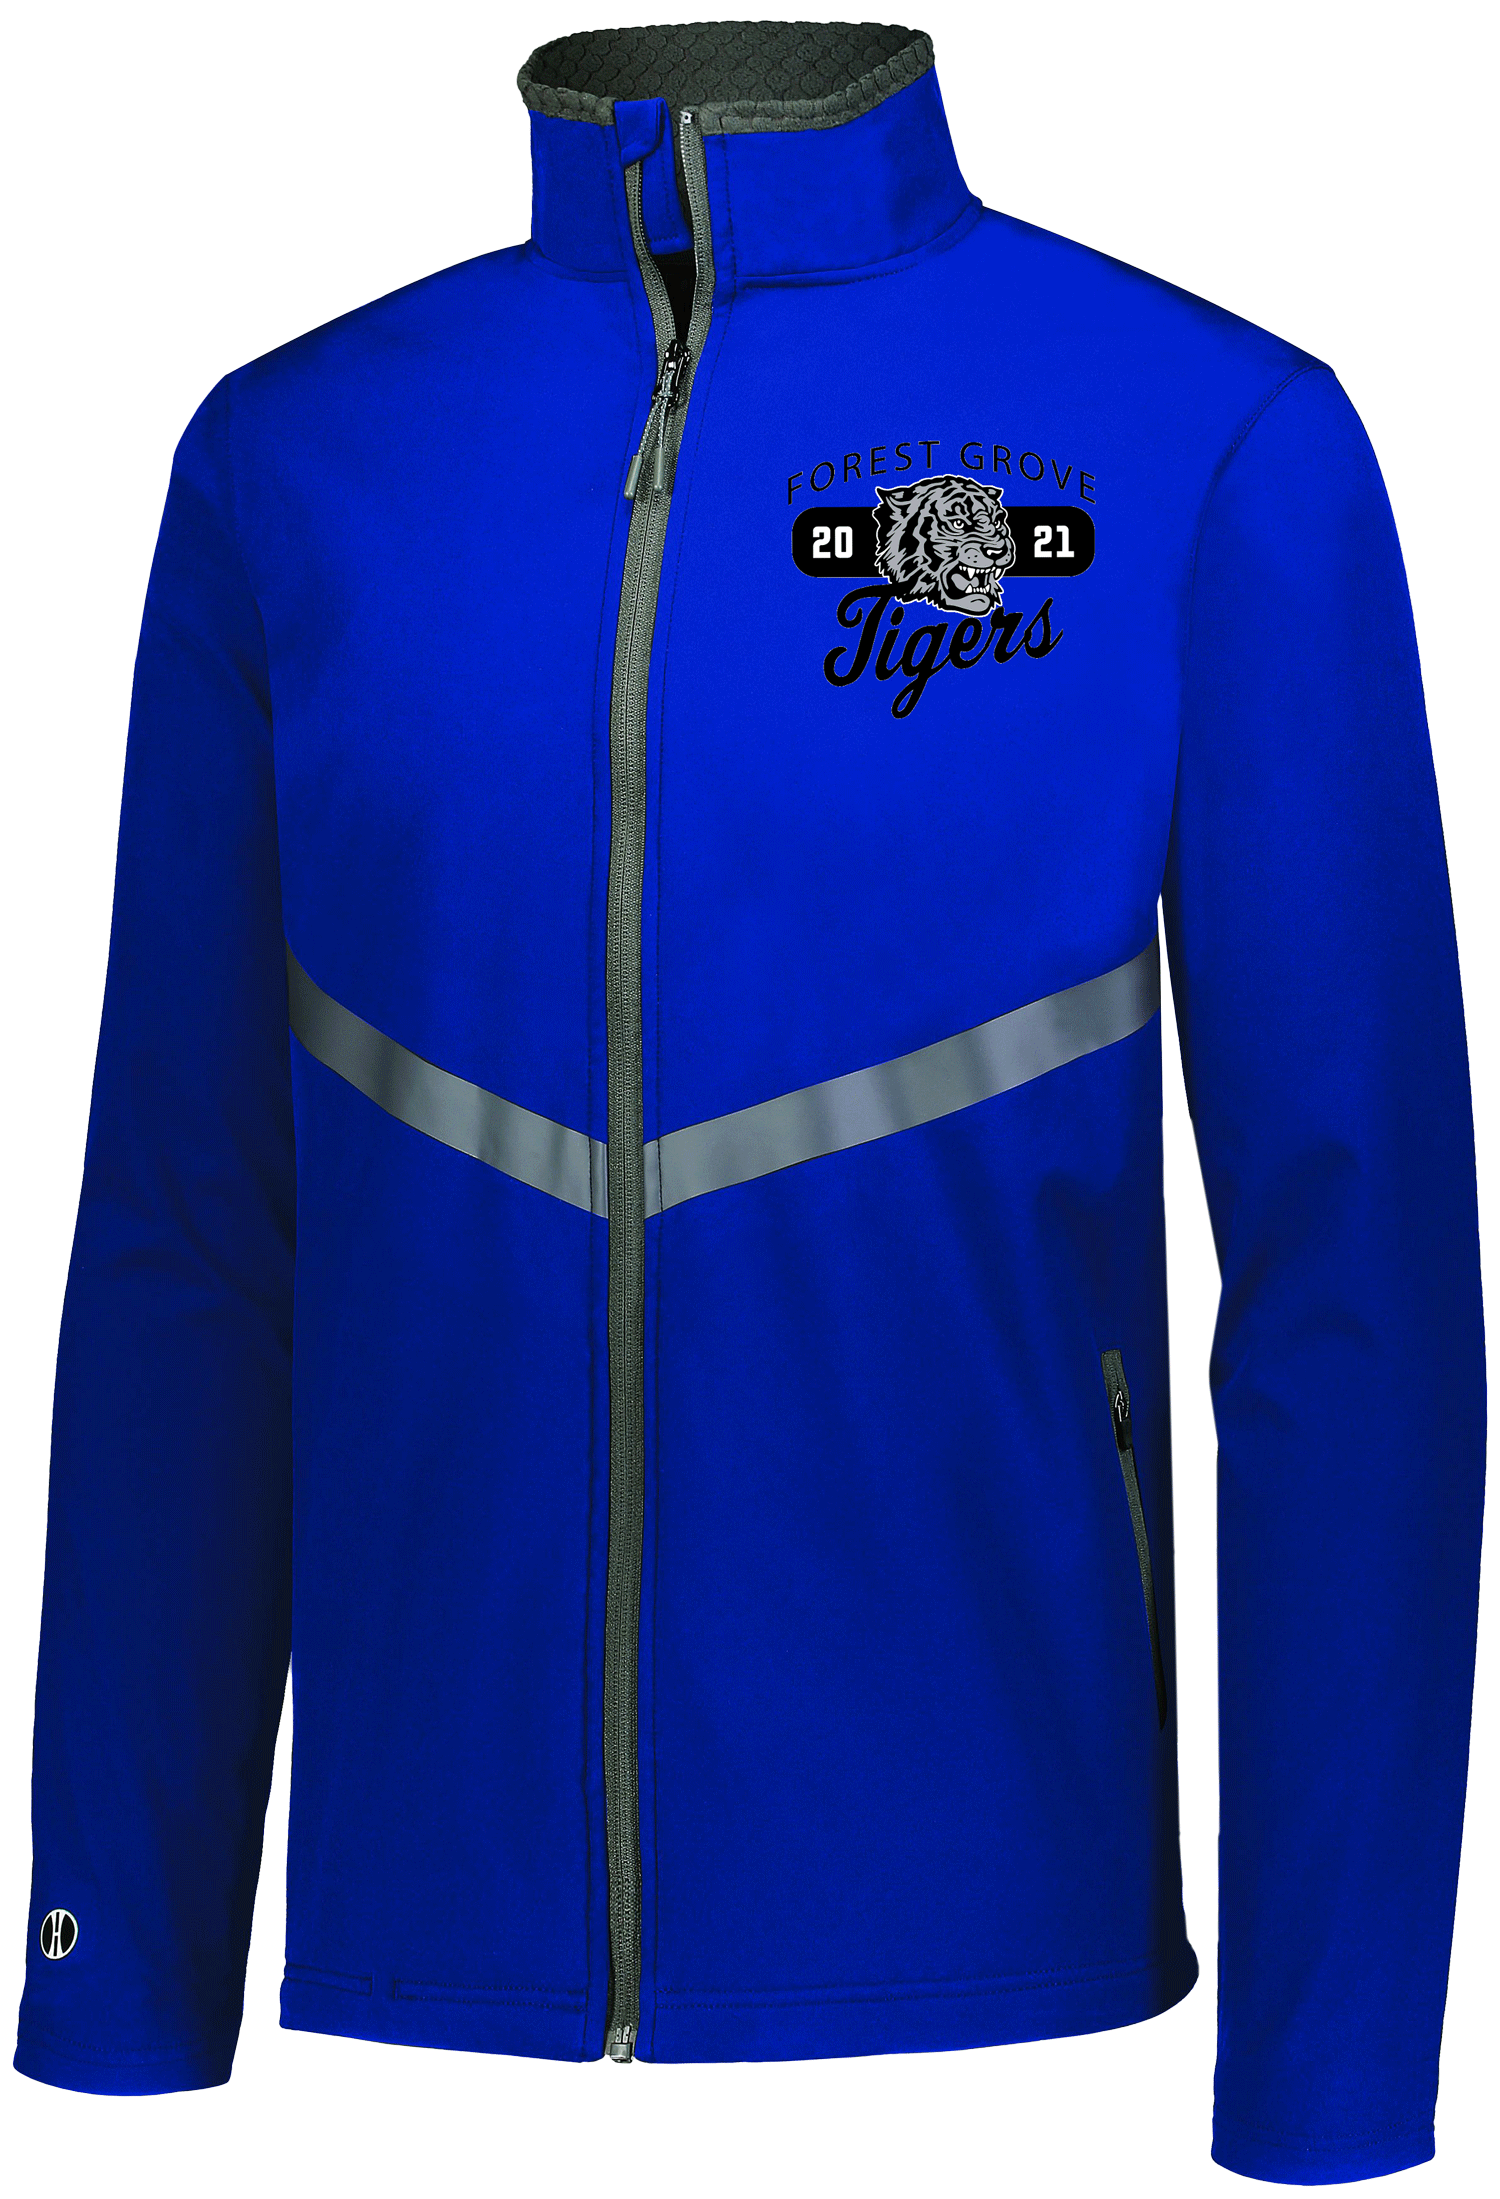 Royal zip up jacket featuring Columbus OH custom embroidery